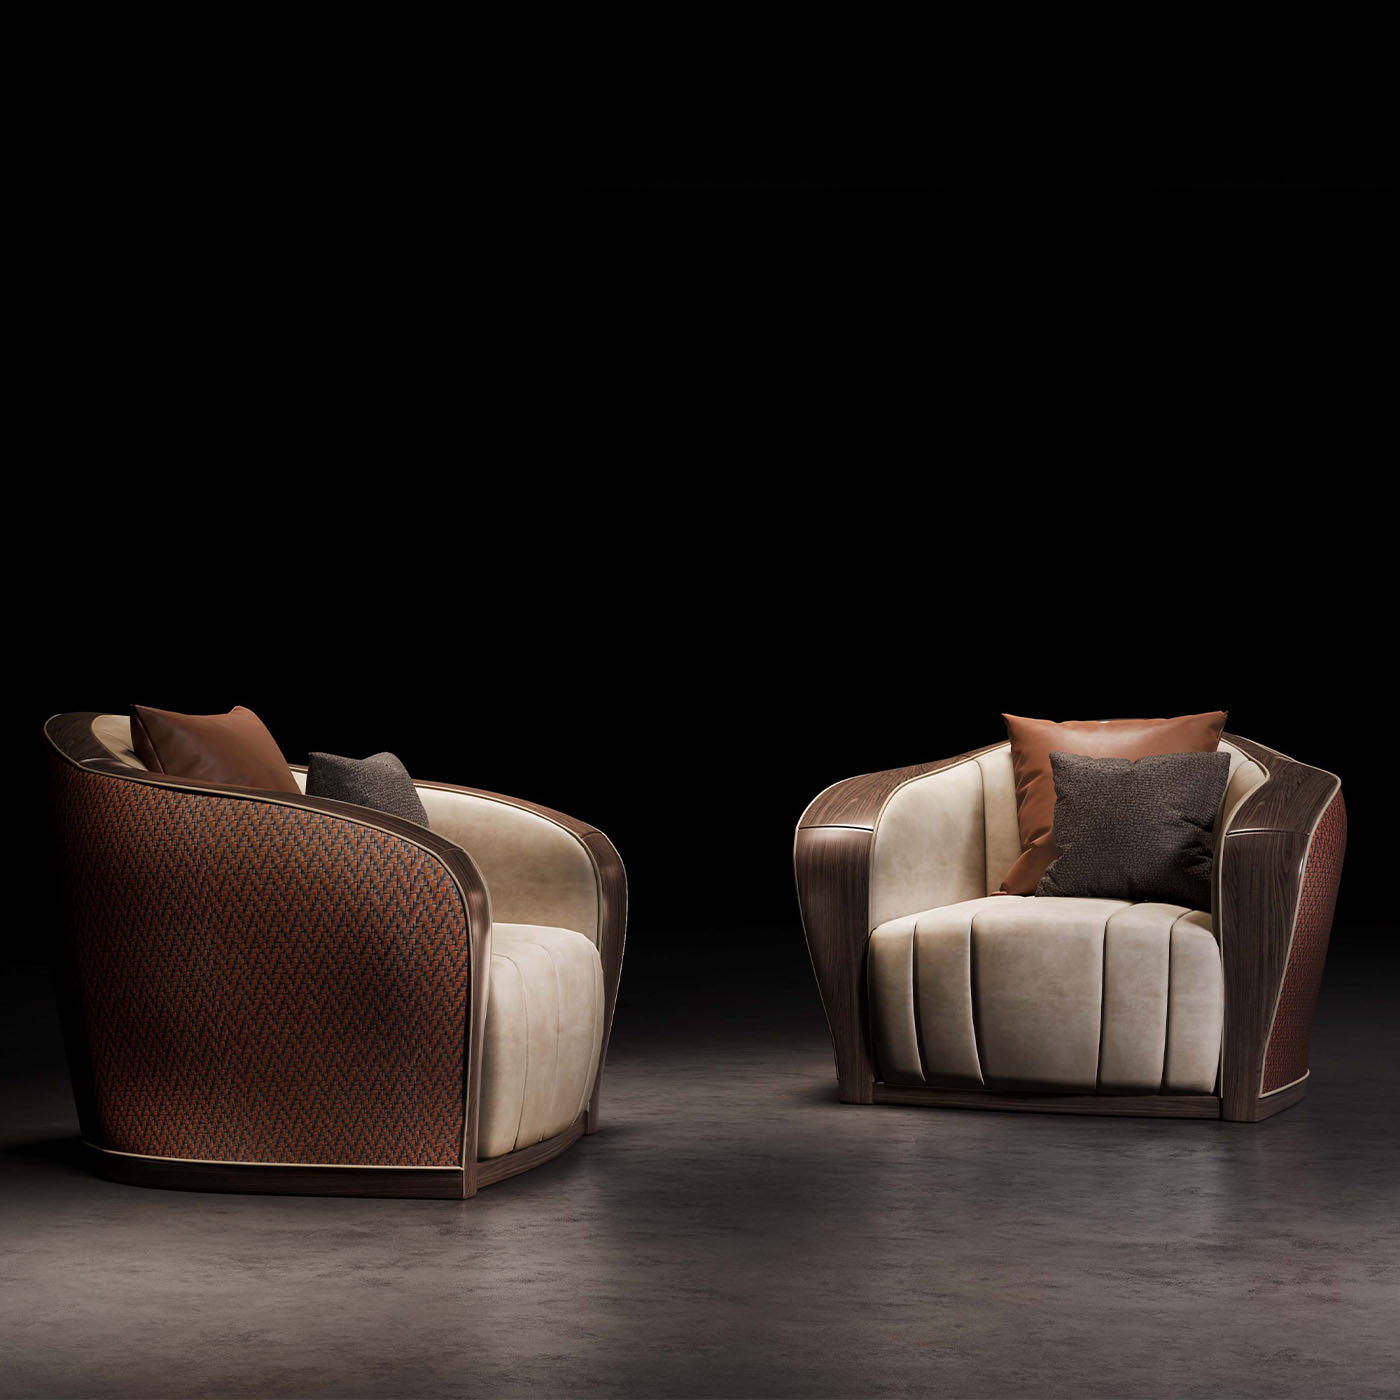 Castagno Channeled Brown-Leather Armchair - Alternative view 2